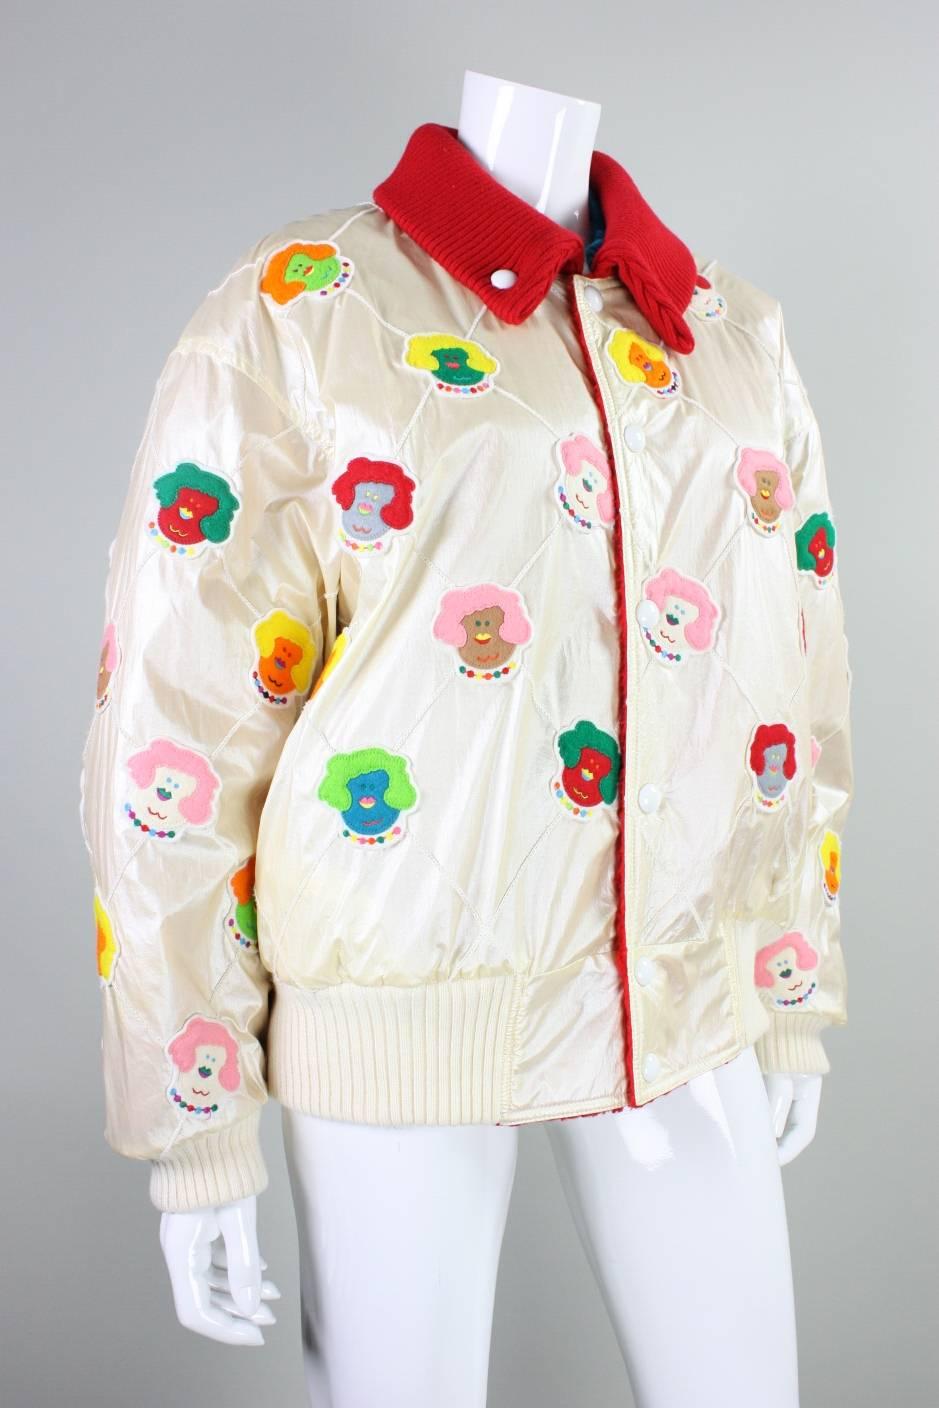 Vintage Jacket from K Factory by Nobuo Ikeda dates to the 1980's and is made of an ivory synthetic fabric with felt clowns appliqued throughout.  Red ribbed collar can be snapped down or worn up.  Ivory ribbed cuffs and hem.  Lined with red fleece. 